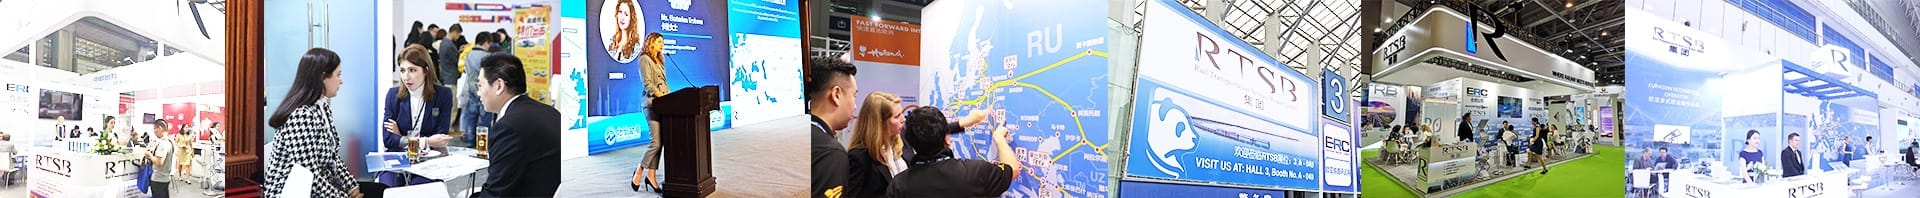 Pictures of RTSBs presence at exhibitions and congresses with employees speaking to customers and giving speeches